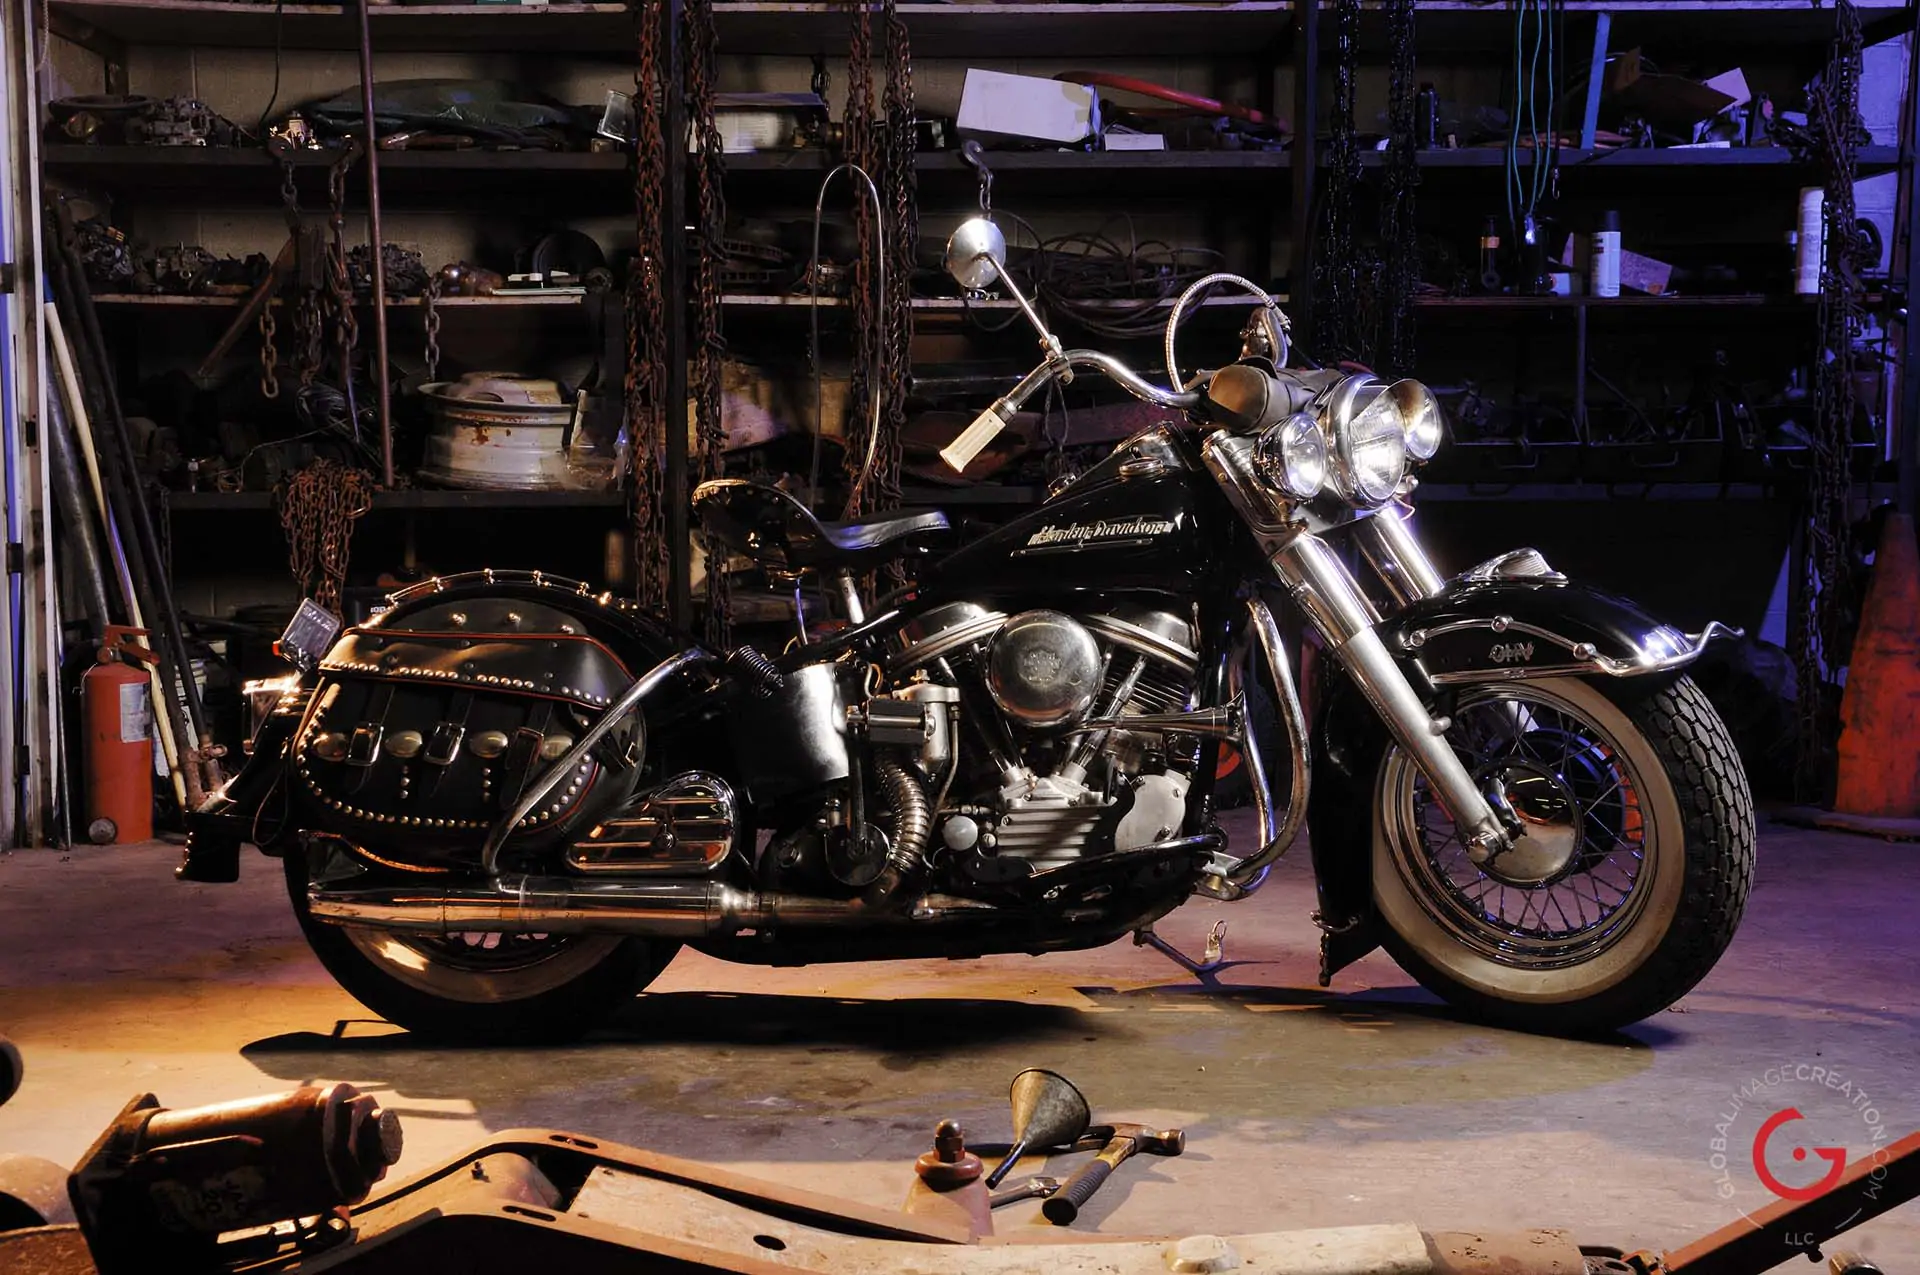 Classic Harley in Garage - Professional Car Photographer, Automotive Photography